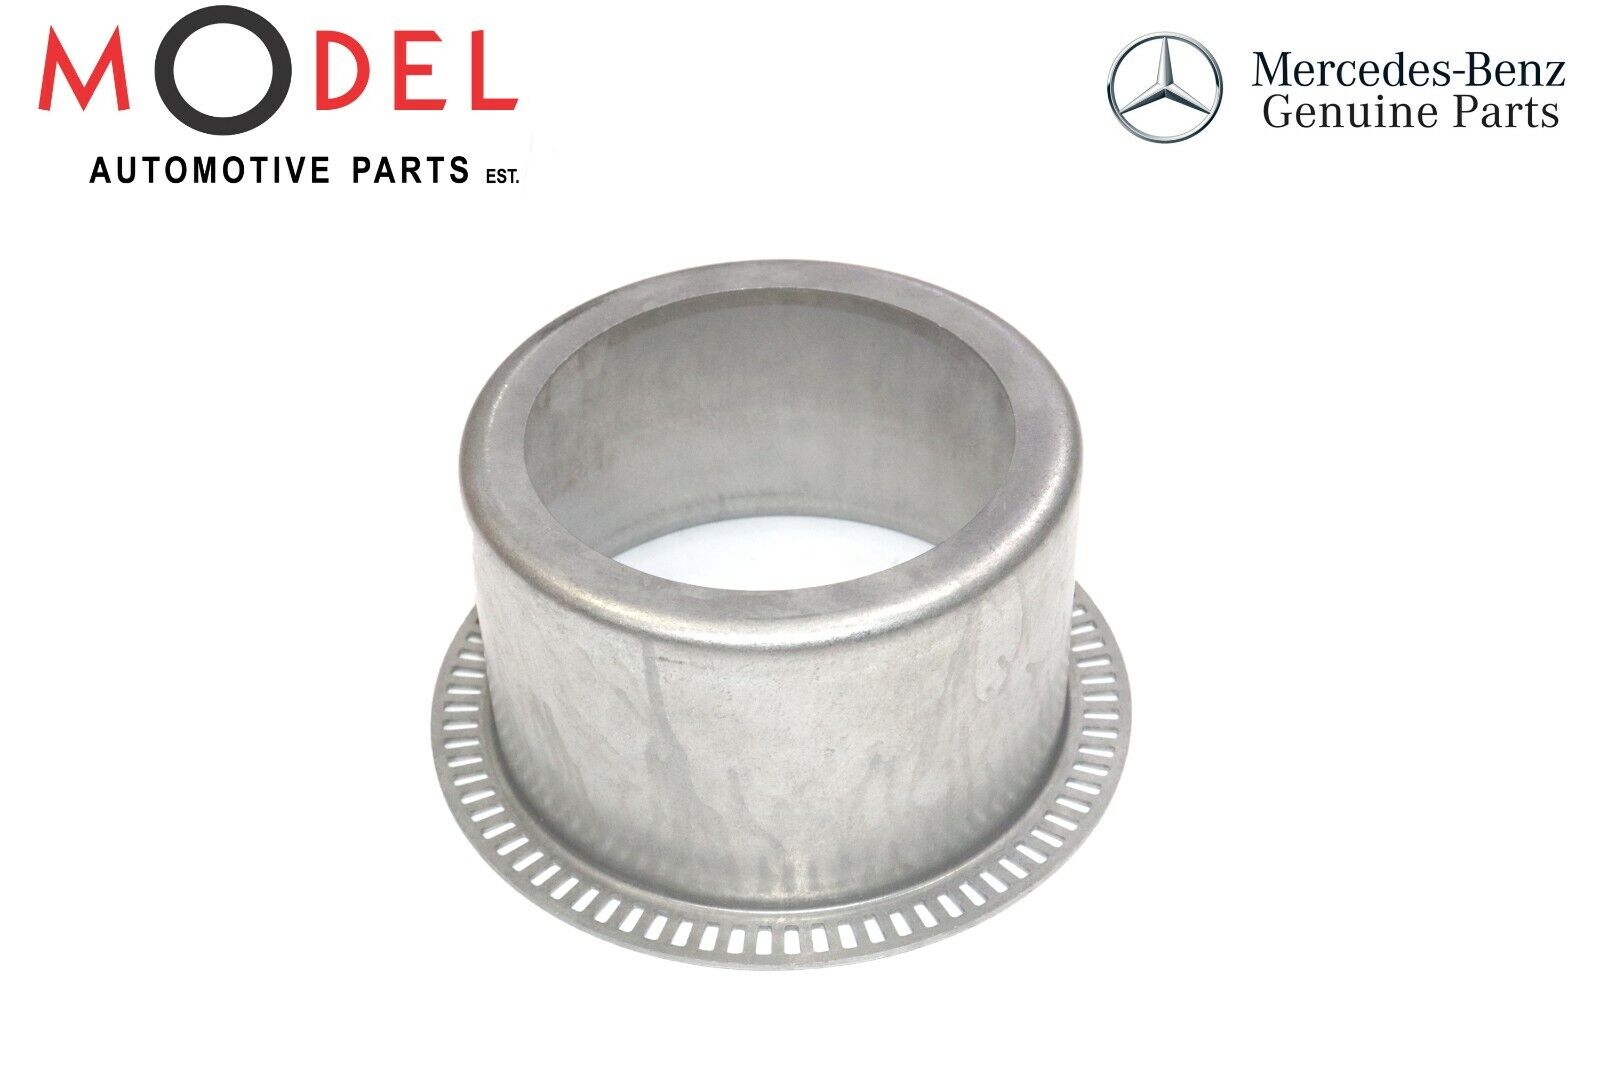 MERCEDES BENZ GENUINE NEW MEASURING RING 9703560415